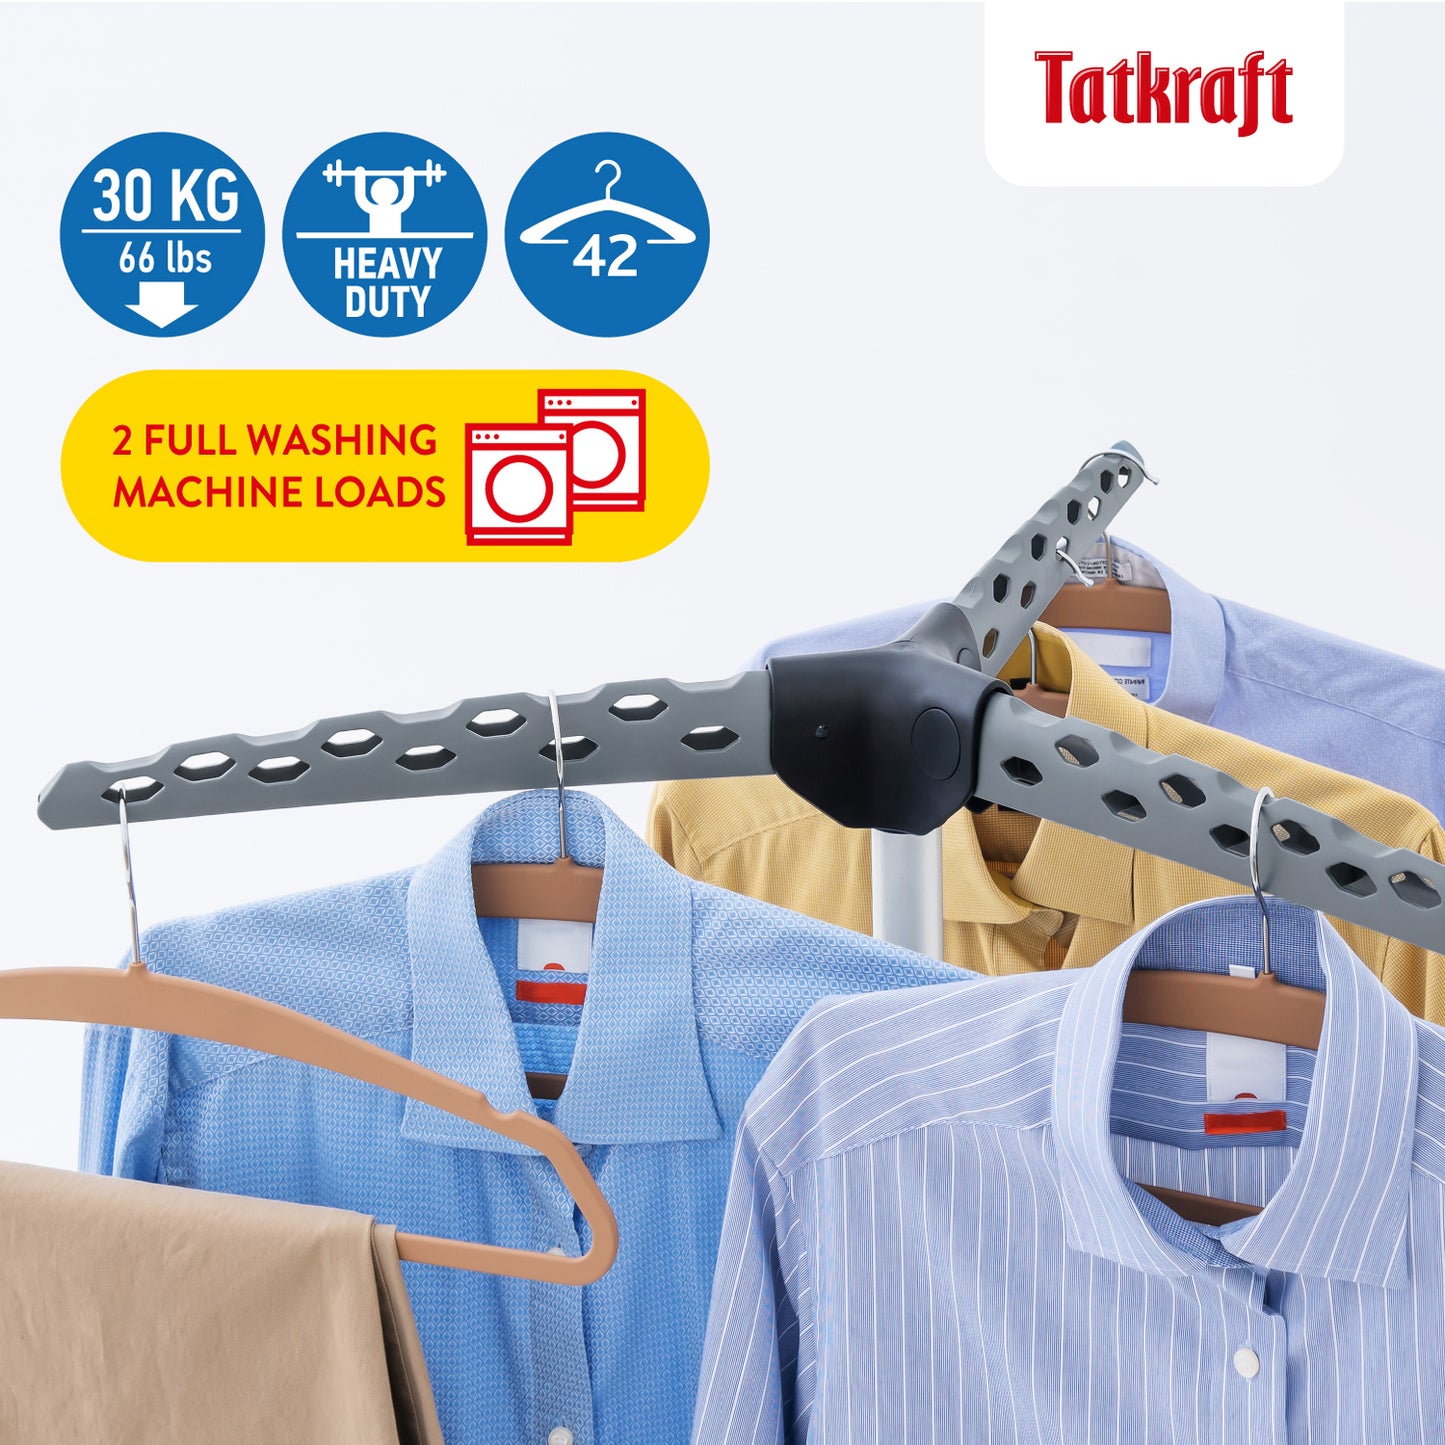 Clothes Airer, Sturdy Foldable Clothes Airer, Clothes Hanger Stand, Drying Rack, Tripod Air Dryer, Tatkraft Pine, 5